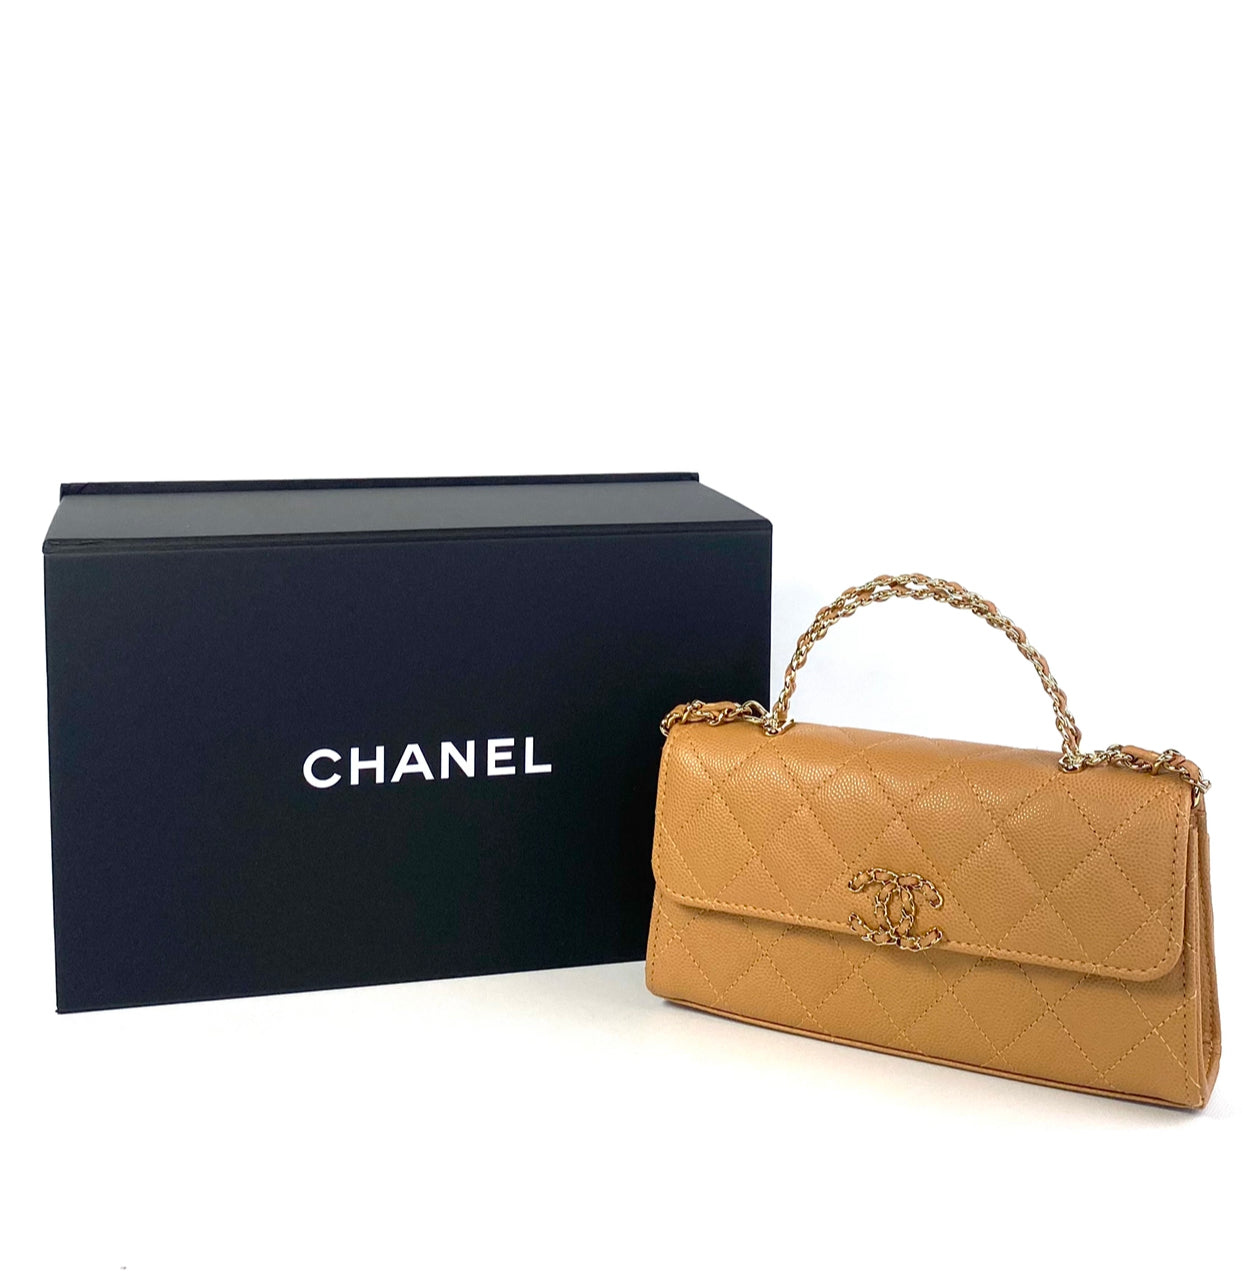 Handbags – tagged Chanel – The Refind Closet